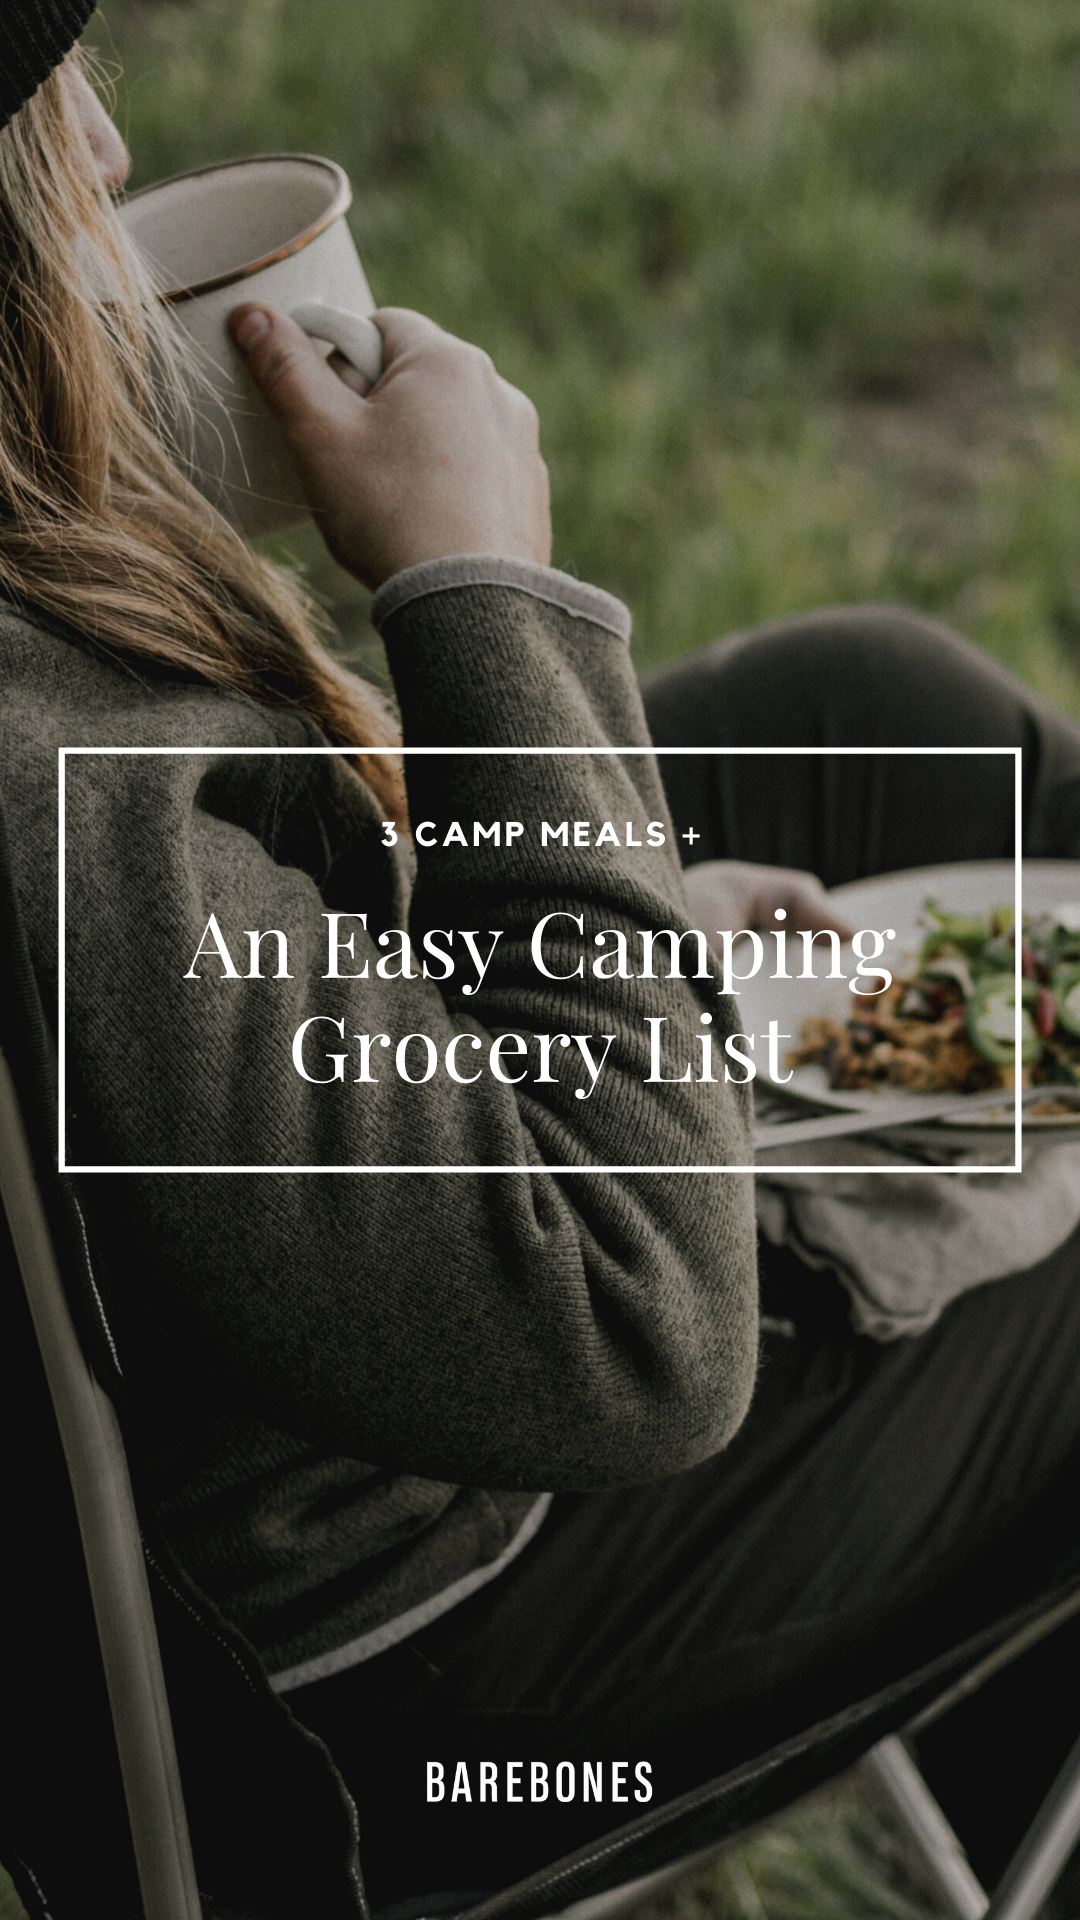 3 Camp Meals + An Easy Camping Grocery List